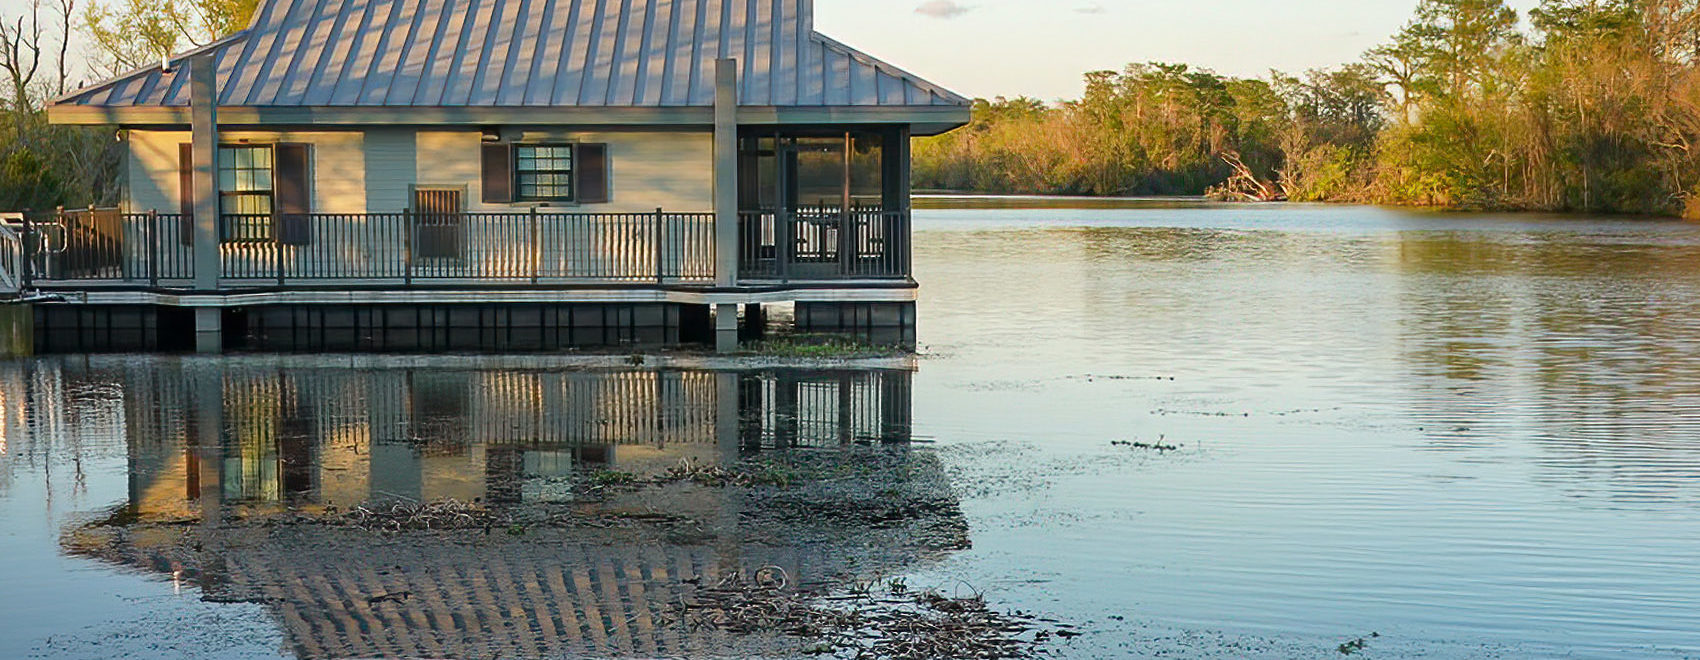 cabin floating on the water in Bayou Segnette State Park Louisiana